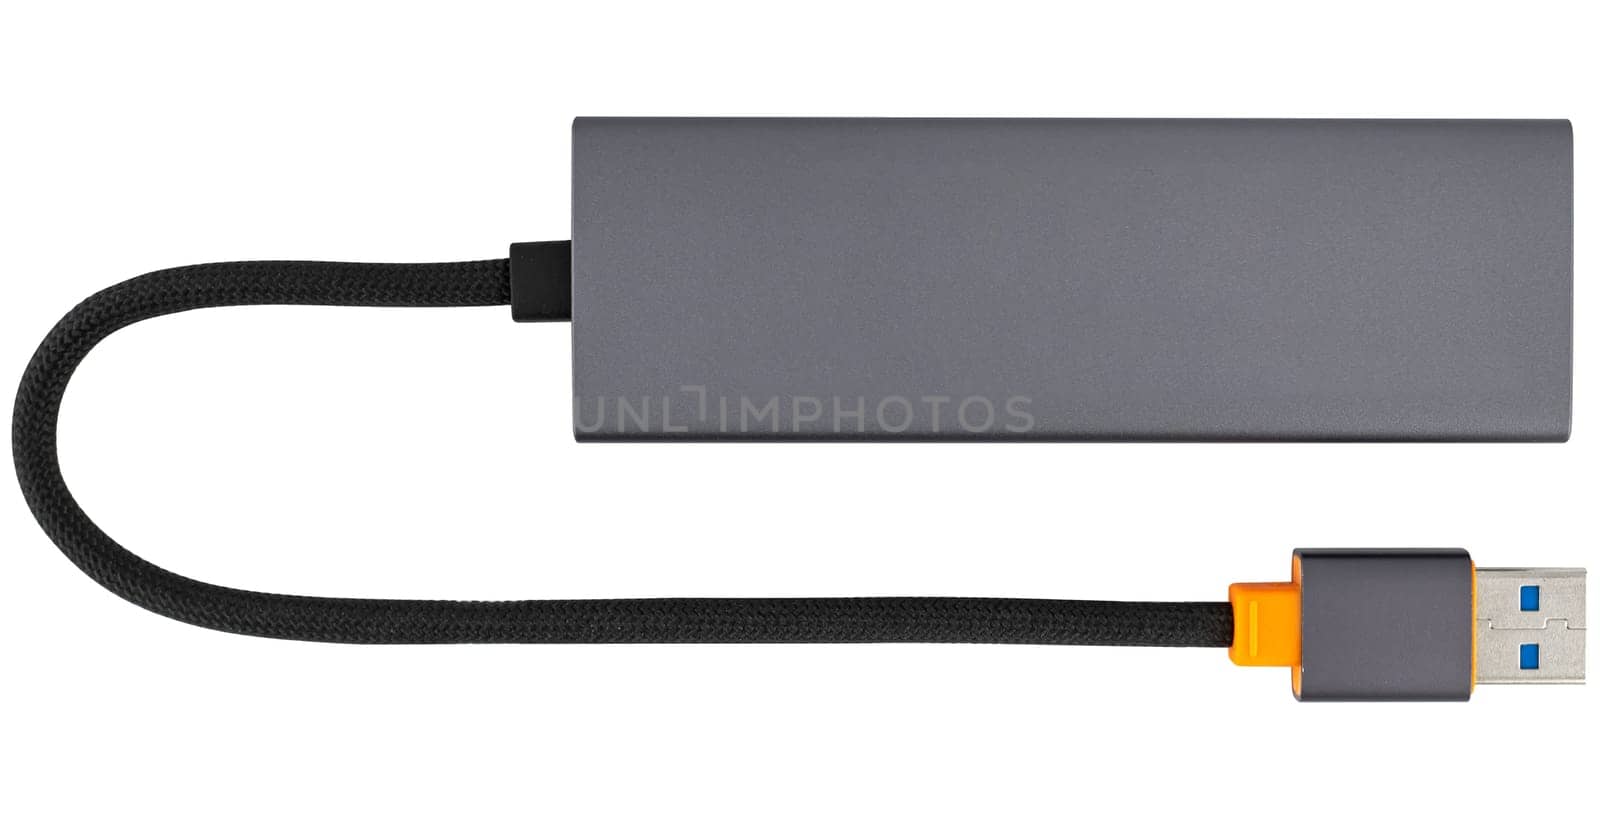 USB hub, USB hub, on white background in insulation by A_A